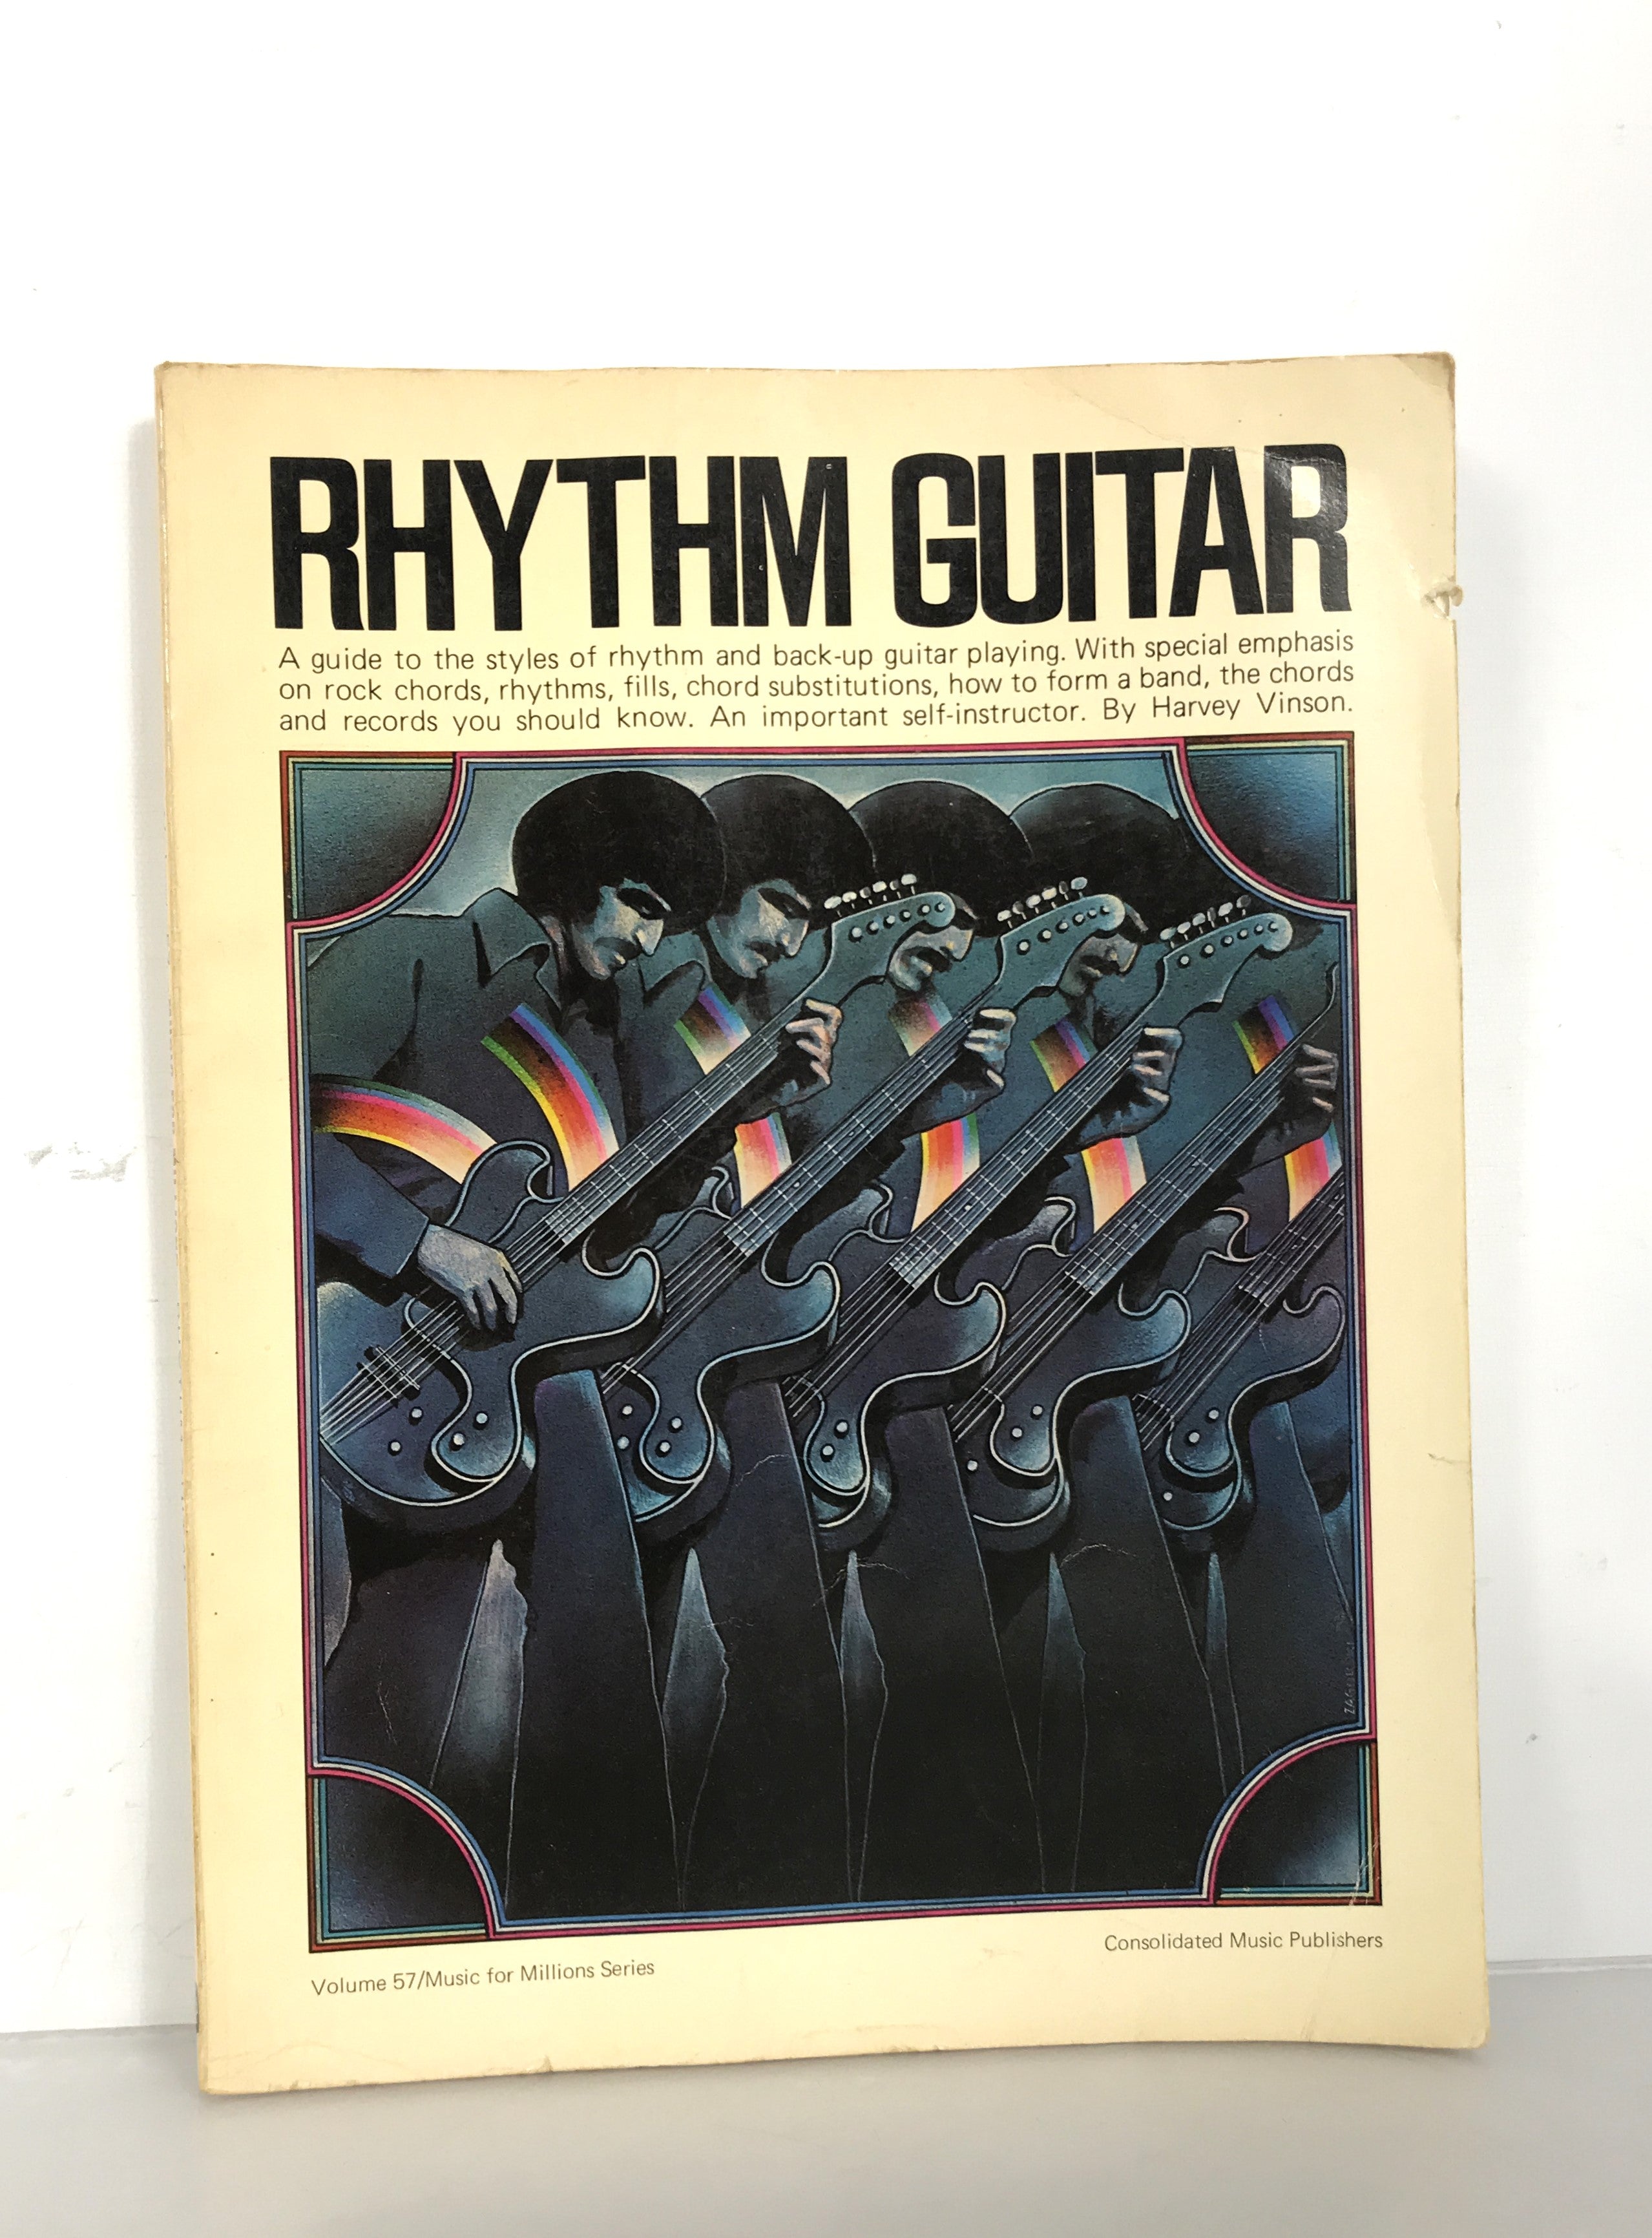 Lot of 3 Vintage Instructional Guitar Books by Grossman and Vinson 1969-1972 SC